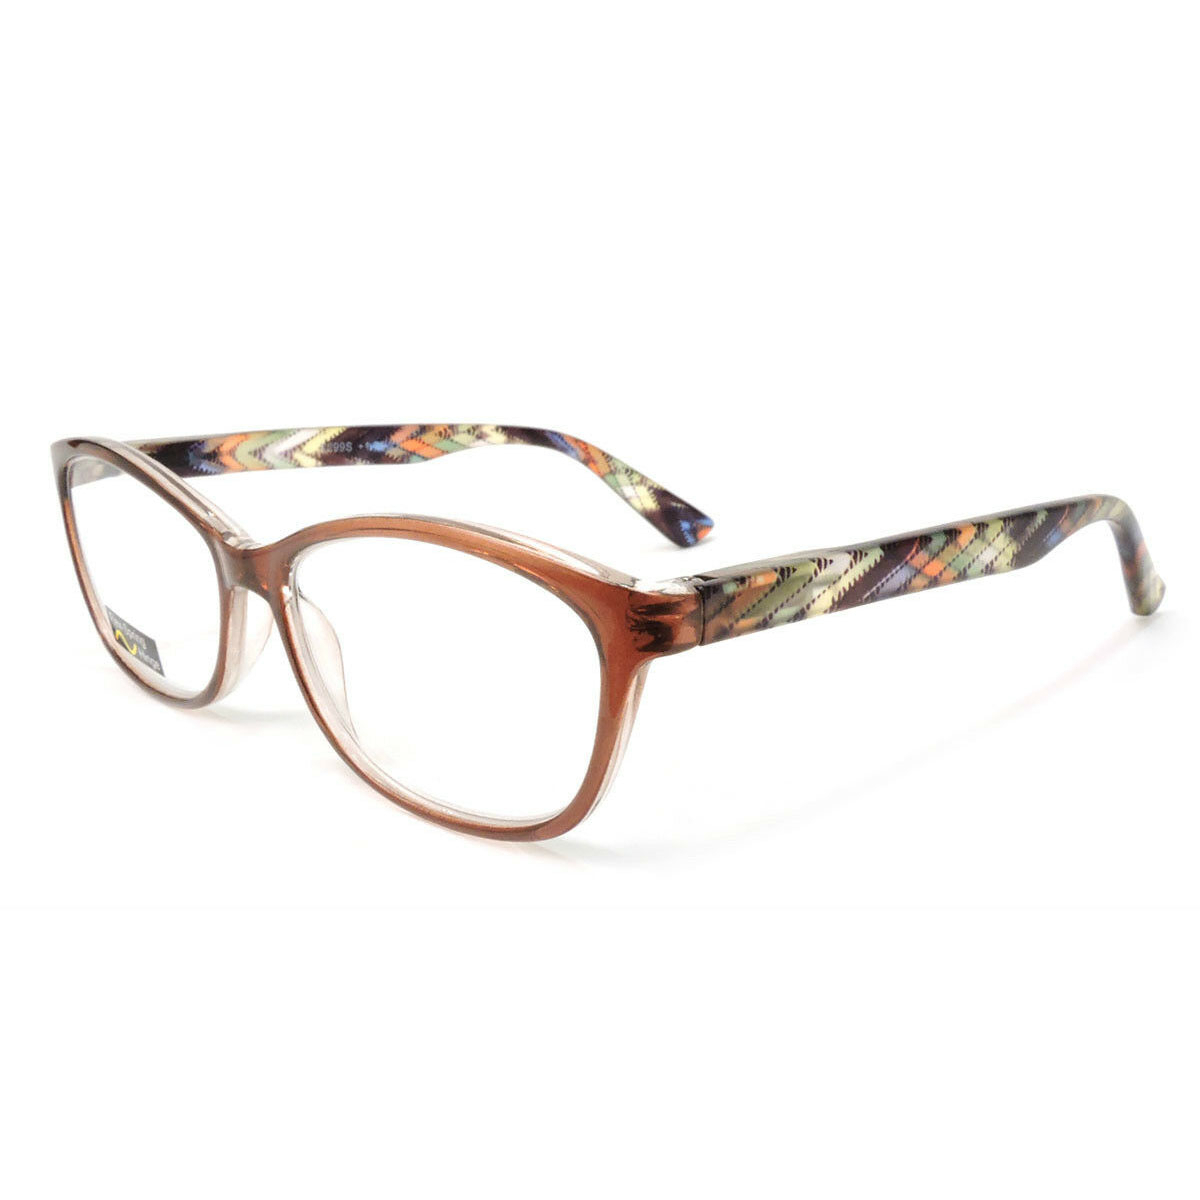 Classic Frame Reading Glasses Colorful Arms Retro Vintage Style - Brown, +2.50